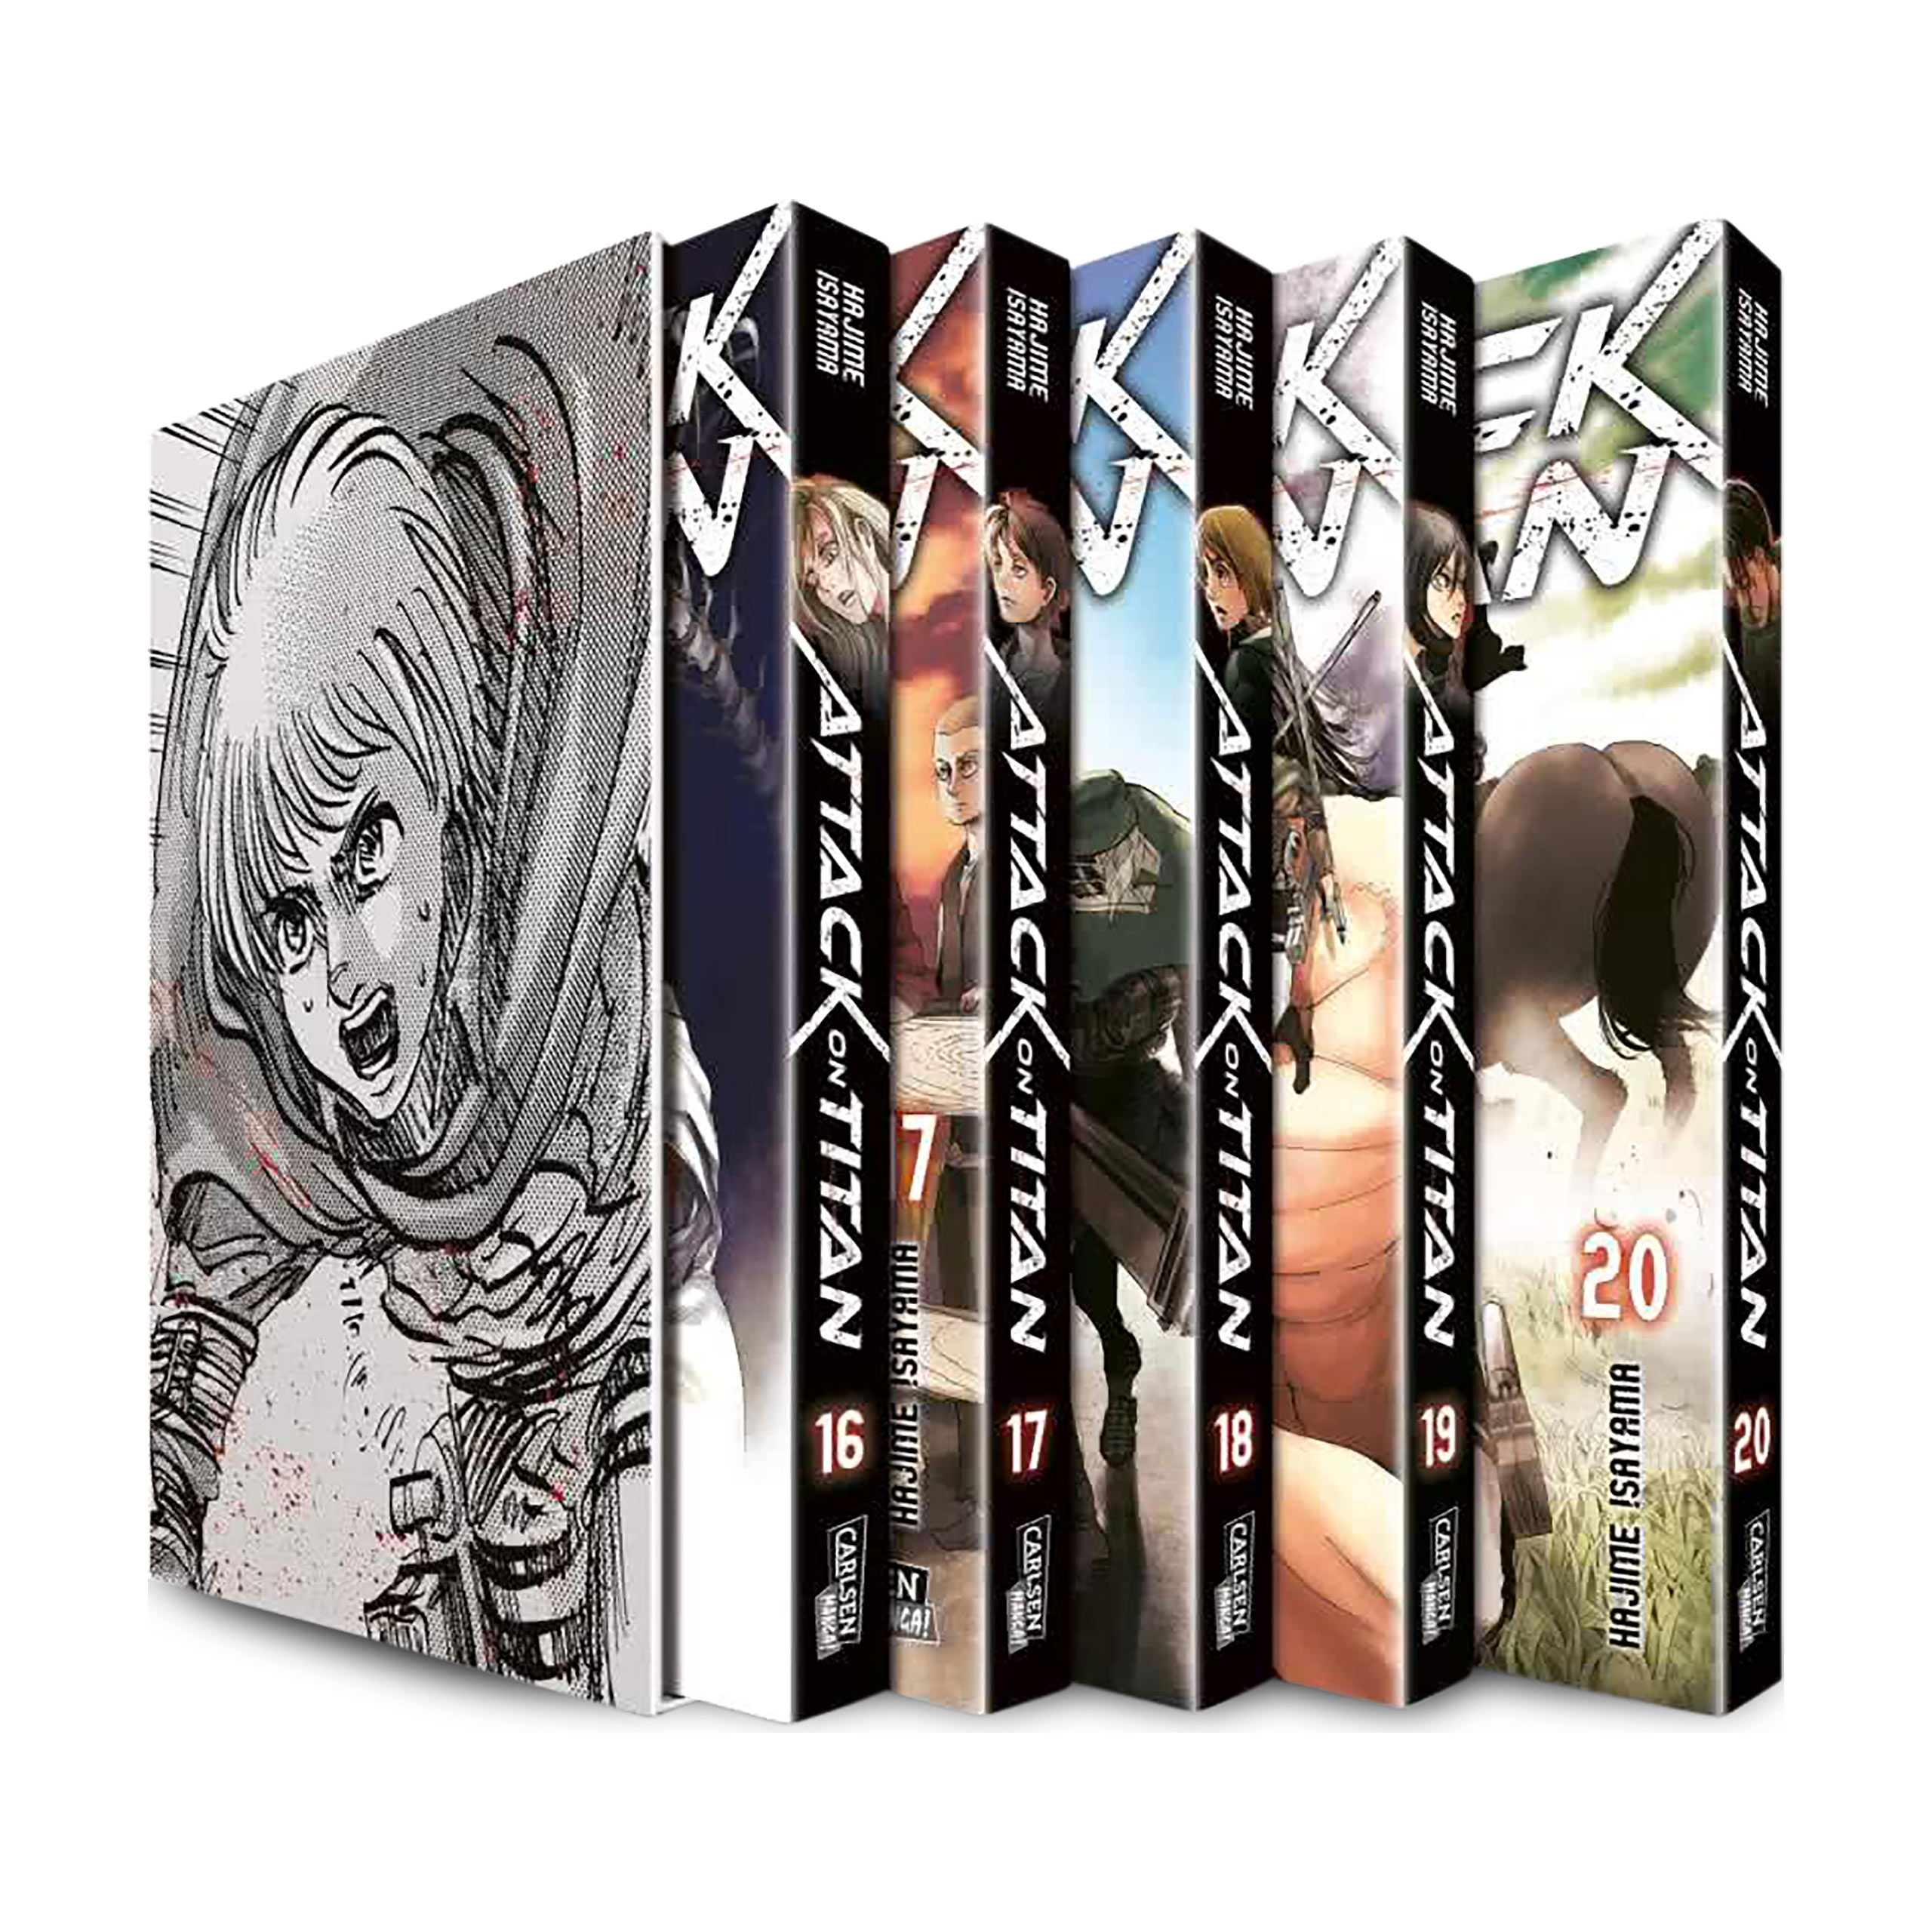 Attack on Titan - Coffret Collection Volumes 16-20